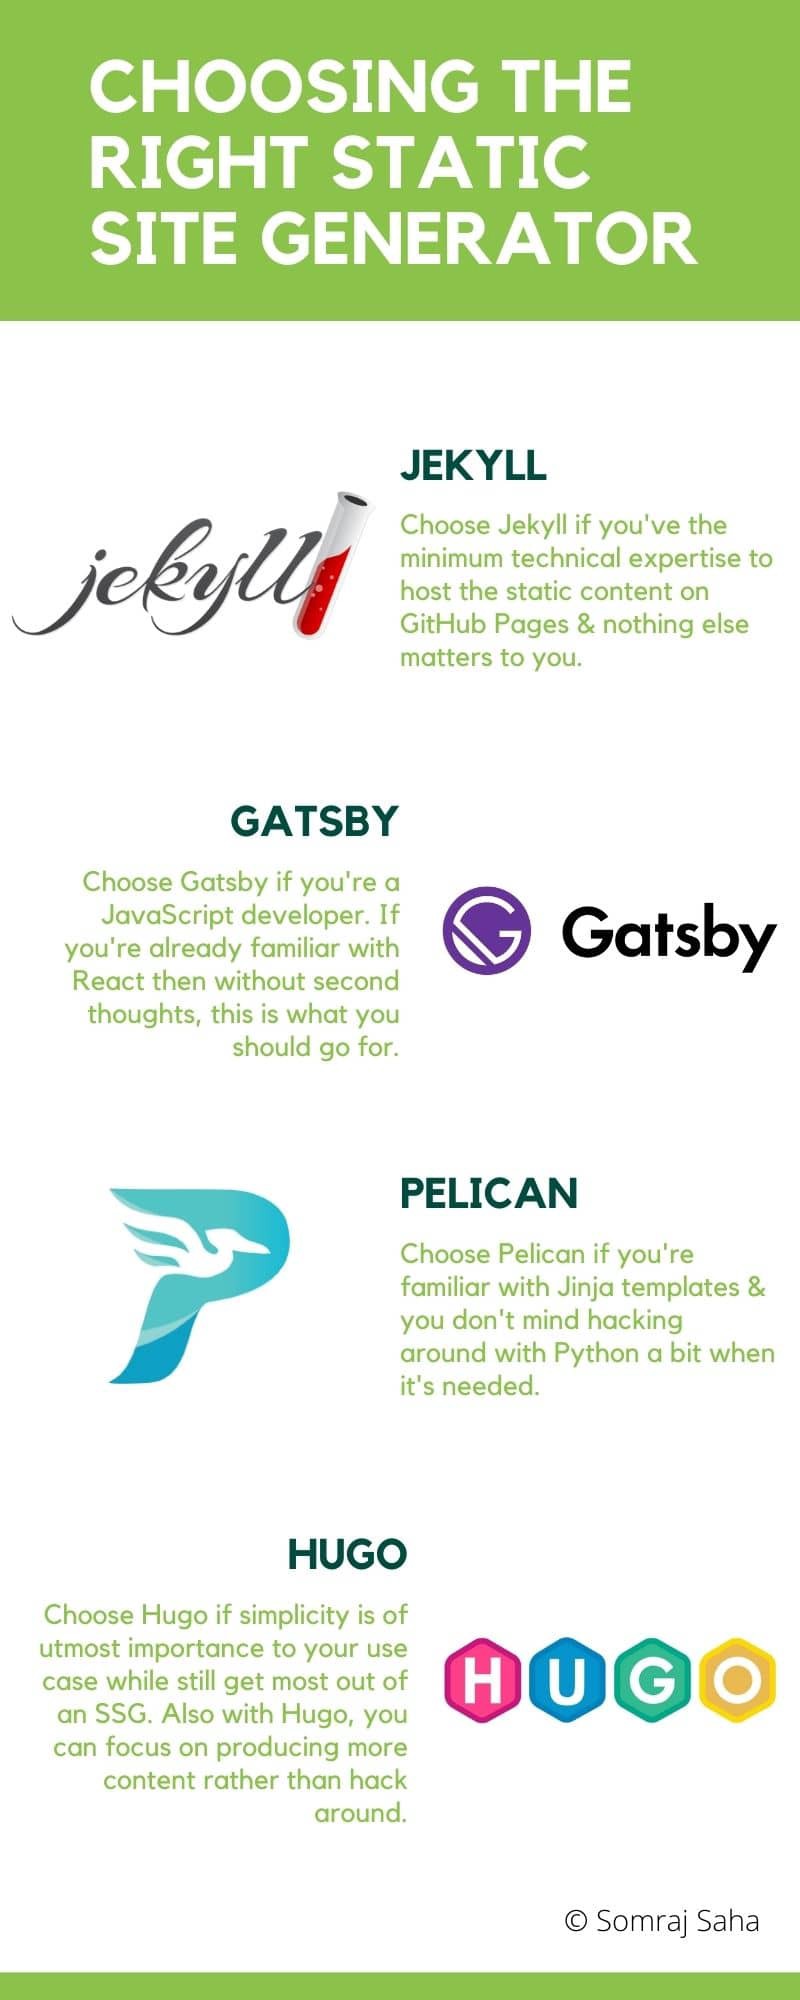 An infographic to help readers choose the right static site generator for their blogging needs.